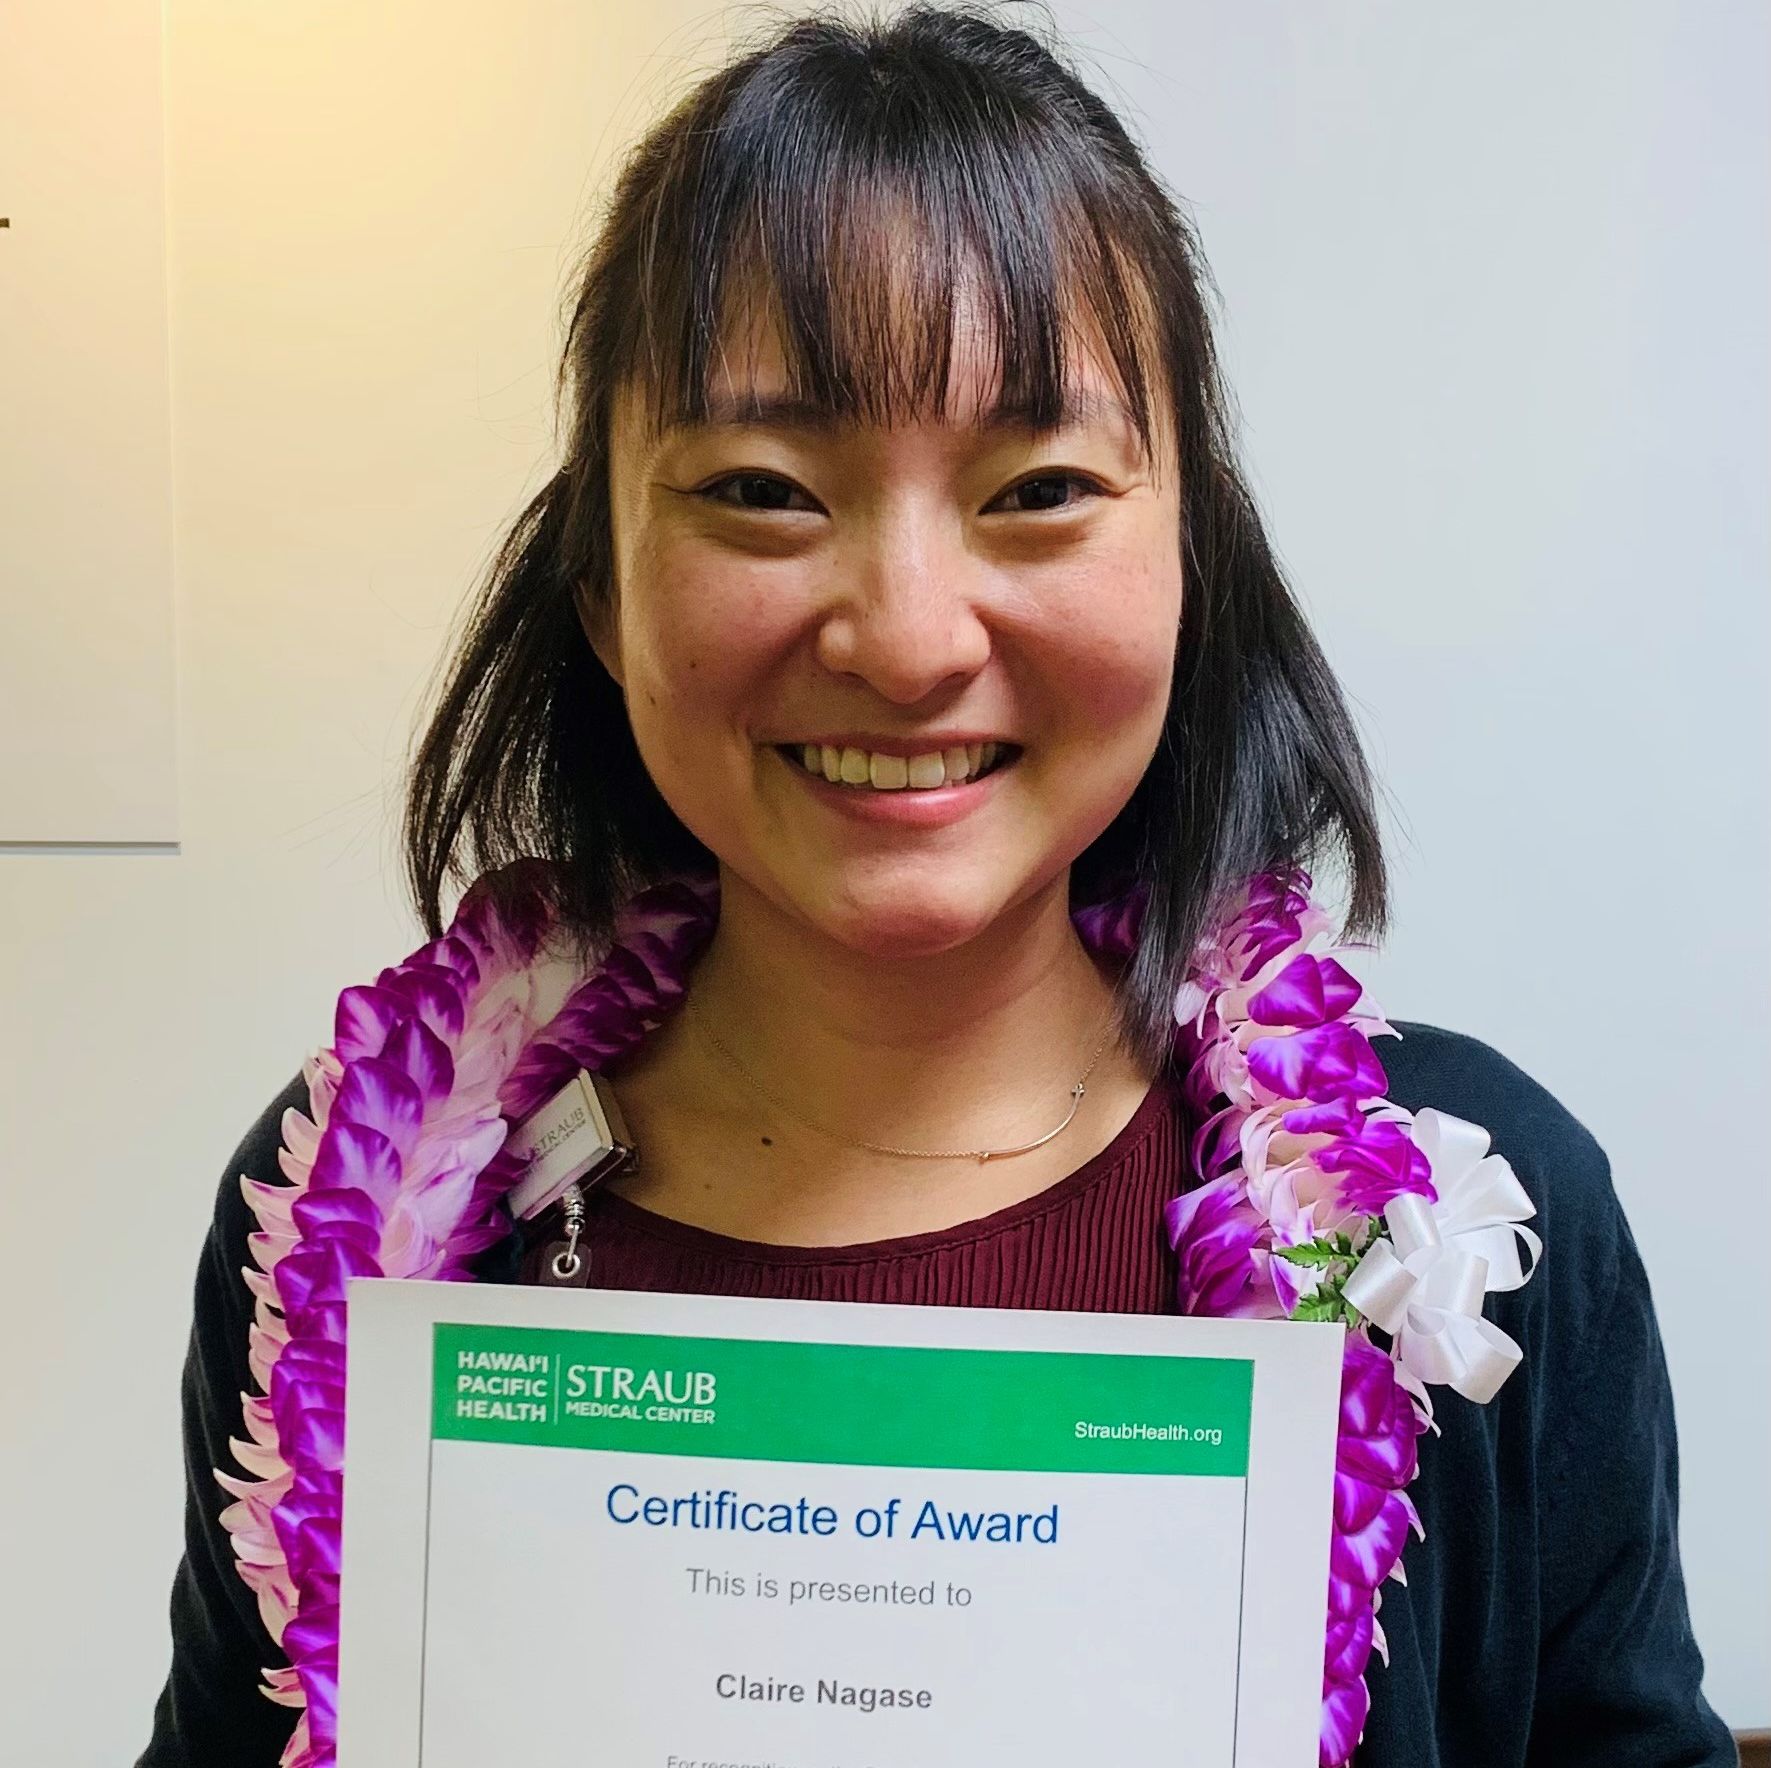 Straub Health on X: Join us in congratulating Claire Nagase of